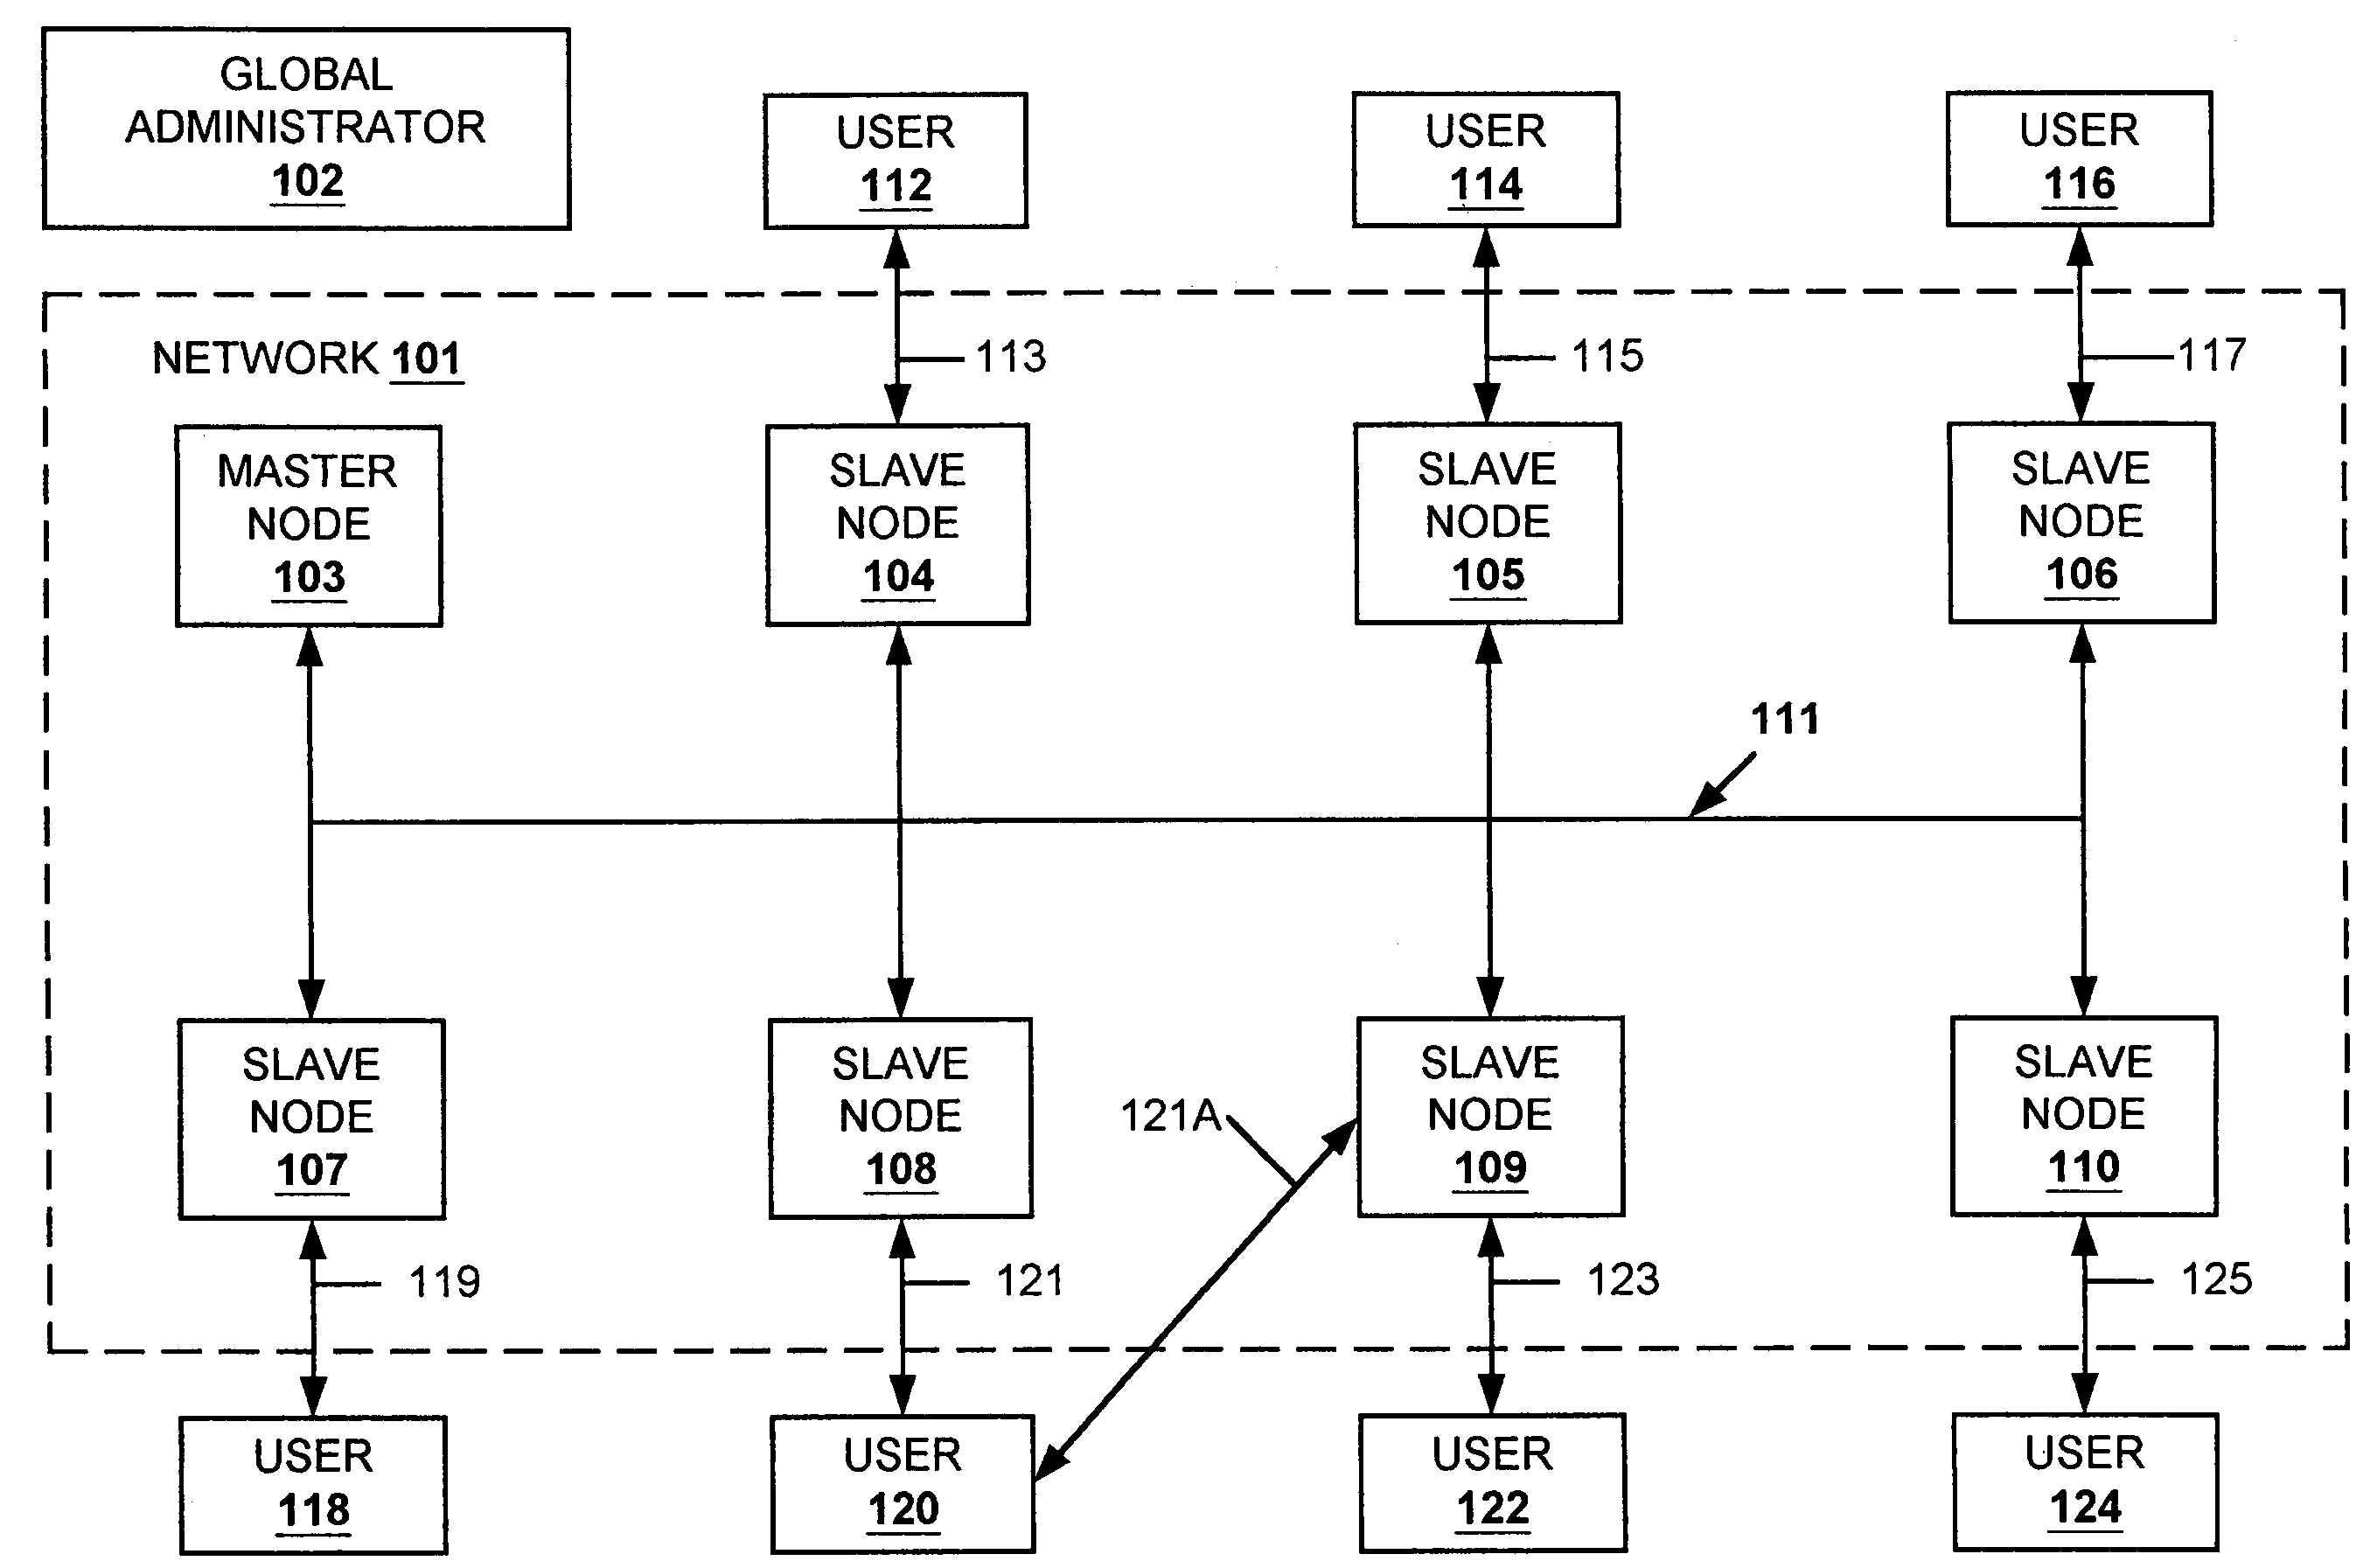 Data replication facility for distributed computing environments